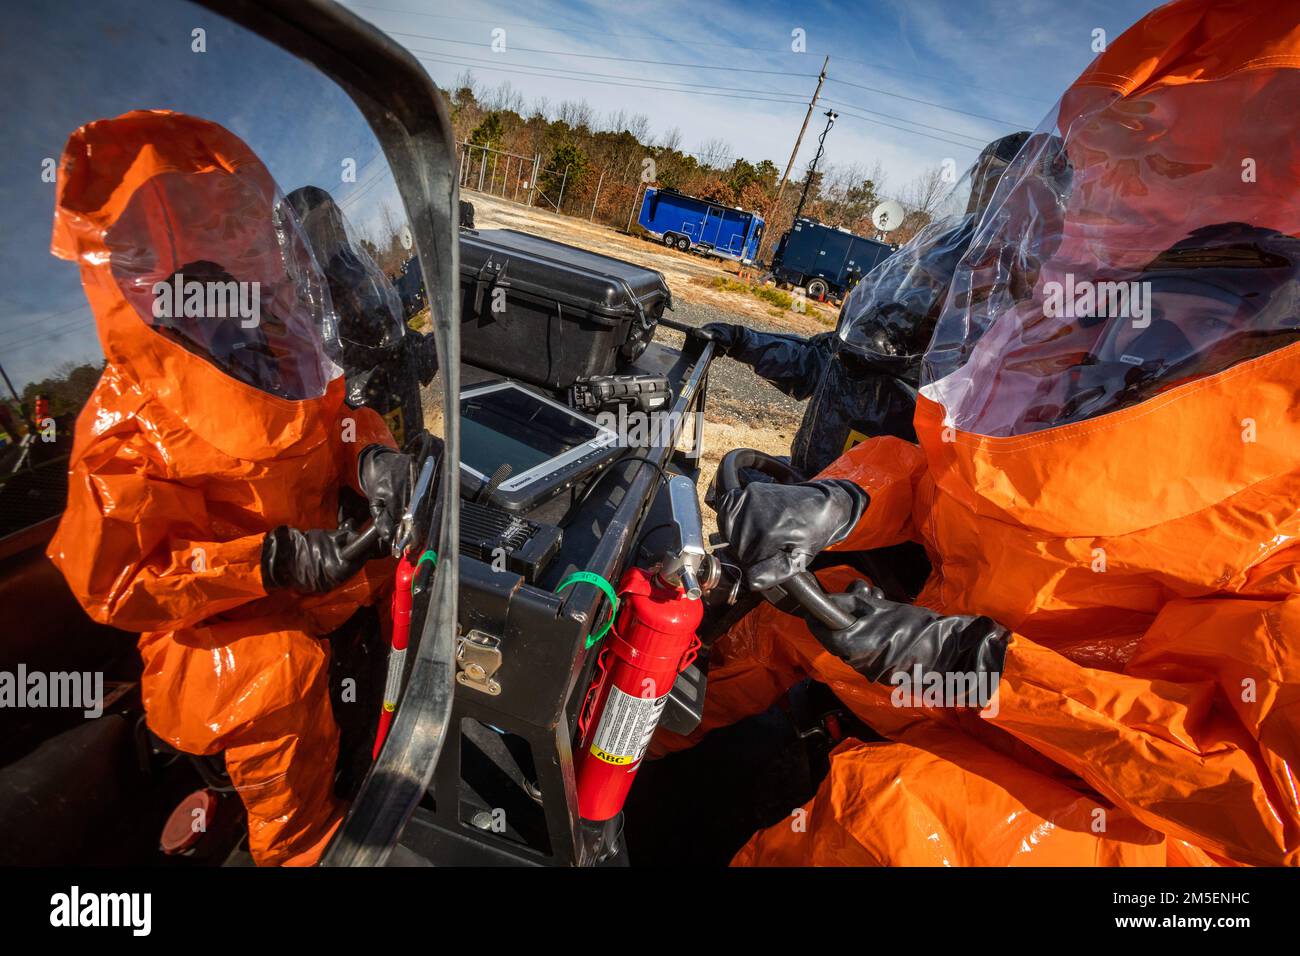 U.S. Air Force Senior Airman Alex J. Potts, right, and Army Sgt. Christopher Mejia, both survey team members with the 21st Weapons of Mass Destruction-Civil Support Team (21st WMD-CST), New Jersey National Guard, prepare to drive to a simulated crime scene during an Army North training exercise at the William J. Hughes Technical Center, Federal Aviation Administration, Egg Harbor Township, New Jersey, March 3, 2022. The 21st identifies chemical, biological, radiological, and nuclear substances; assesses and advises civil authorities on response measures to man-made or natural disasters. (New J Stock Photo